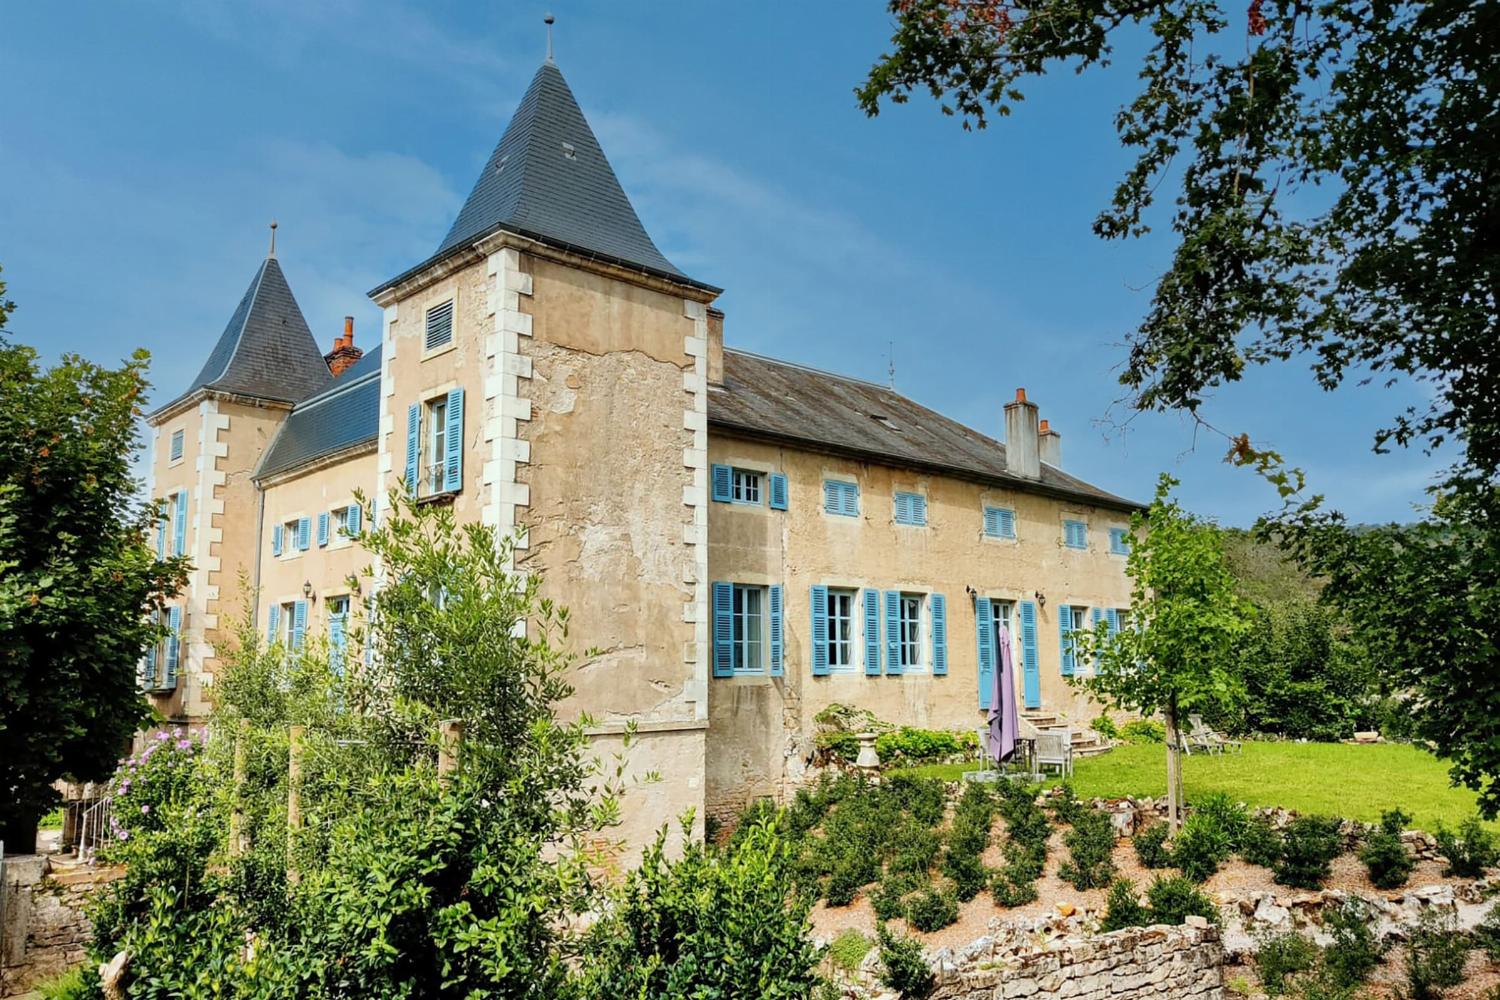 Self-catering accommodation in Pyrénées-Atlantiques